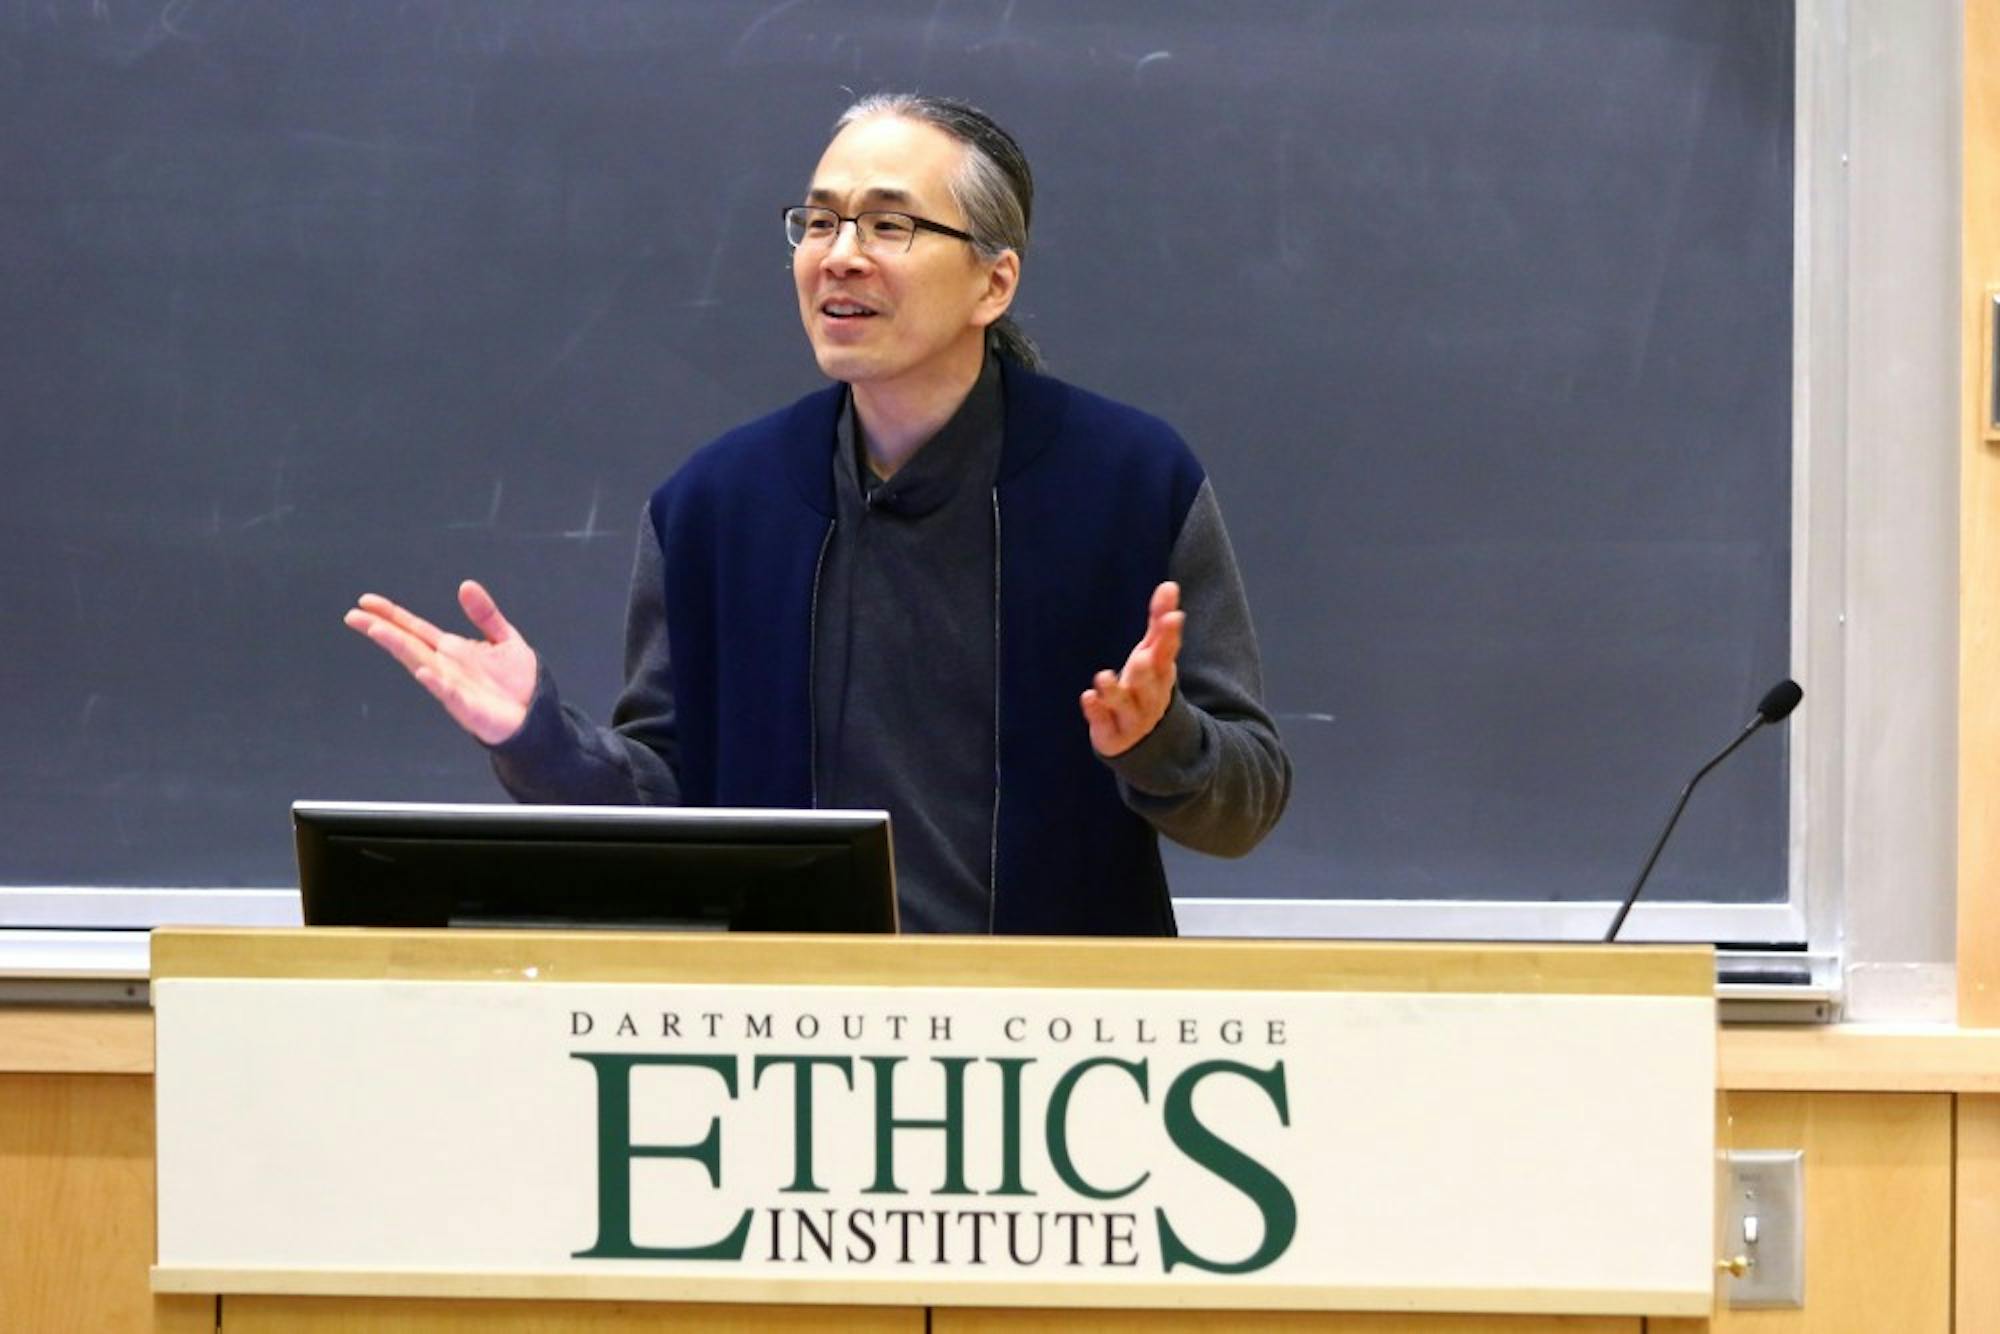 Ted Chiang talks at the Dartmouth Ethics Institute